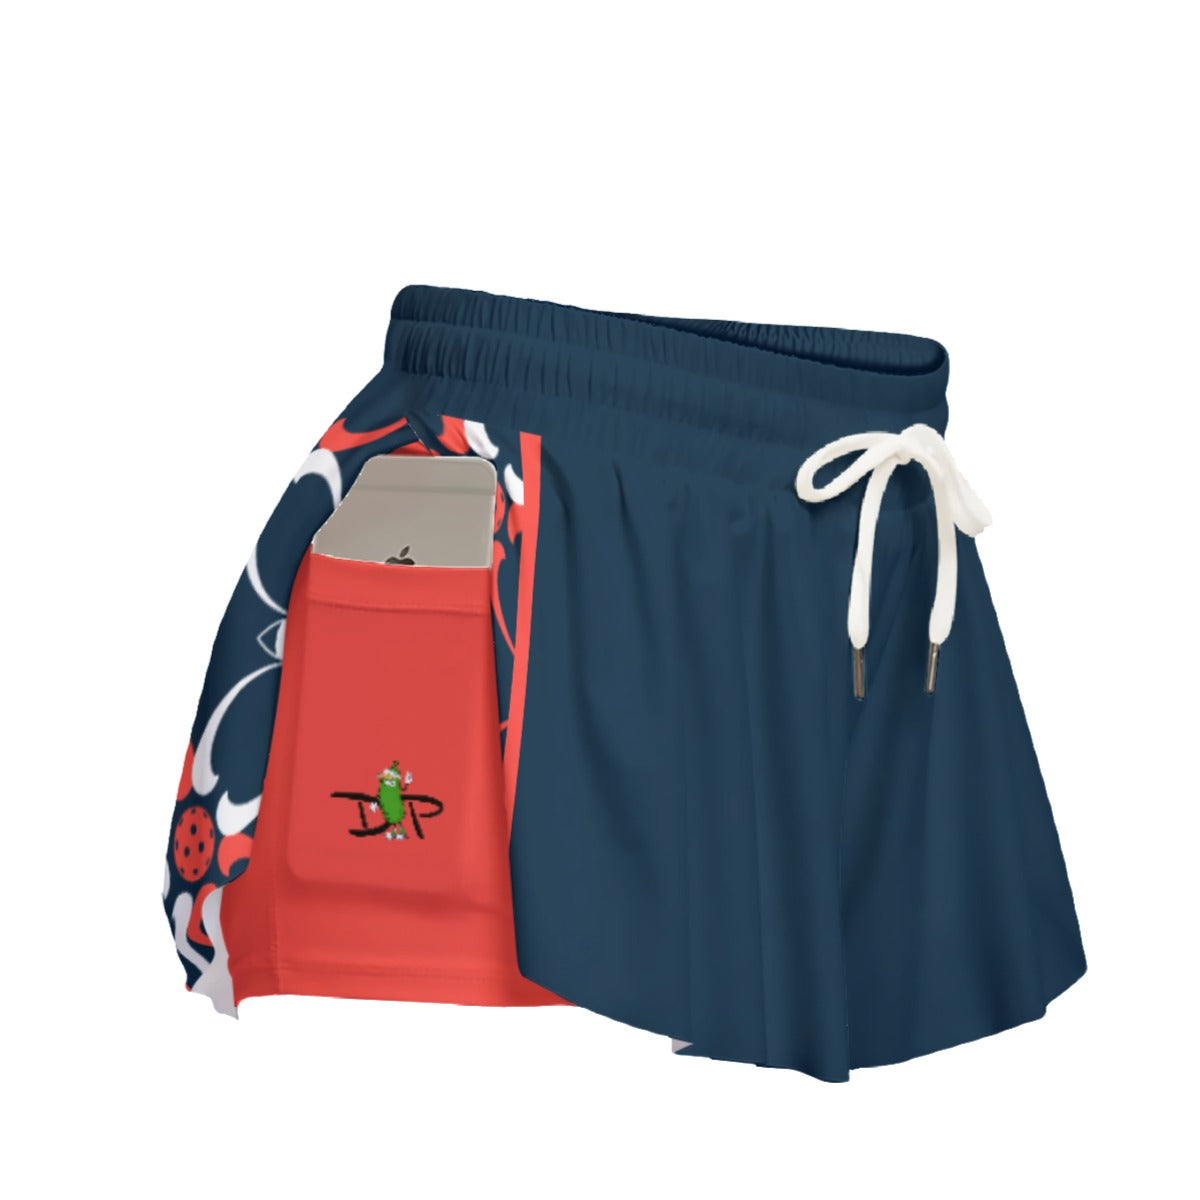 Van - Navy Blue/Blue Petals - Pickleball Women's Sport Culottes with Pockets by Dizzy Pickle